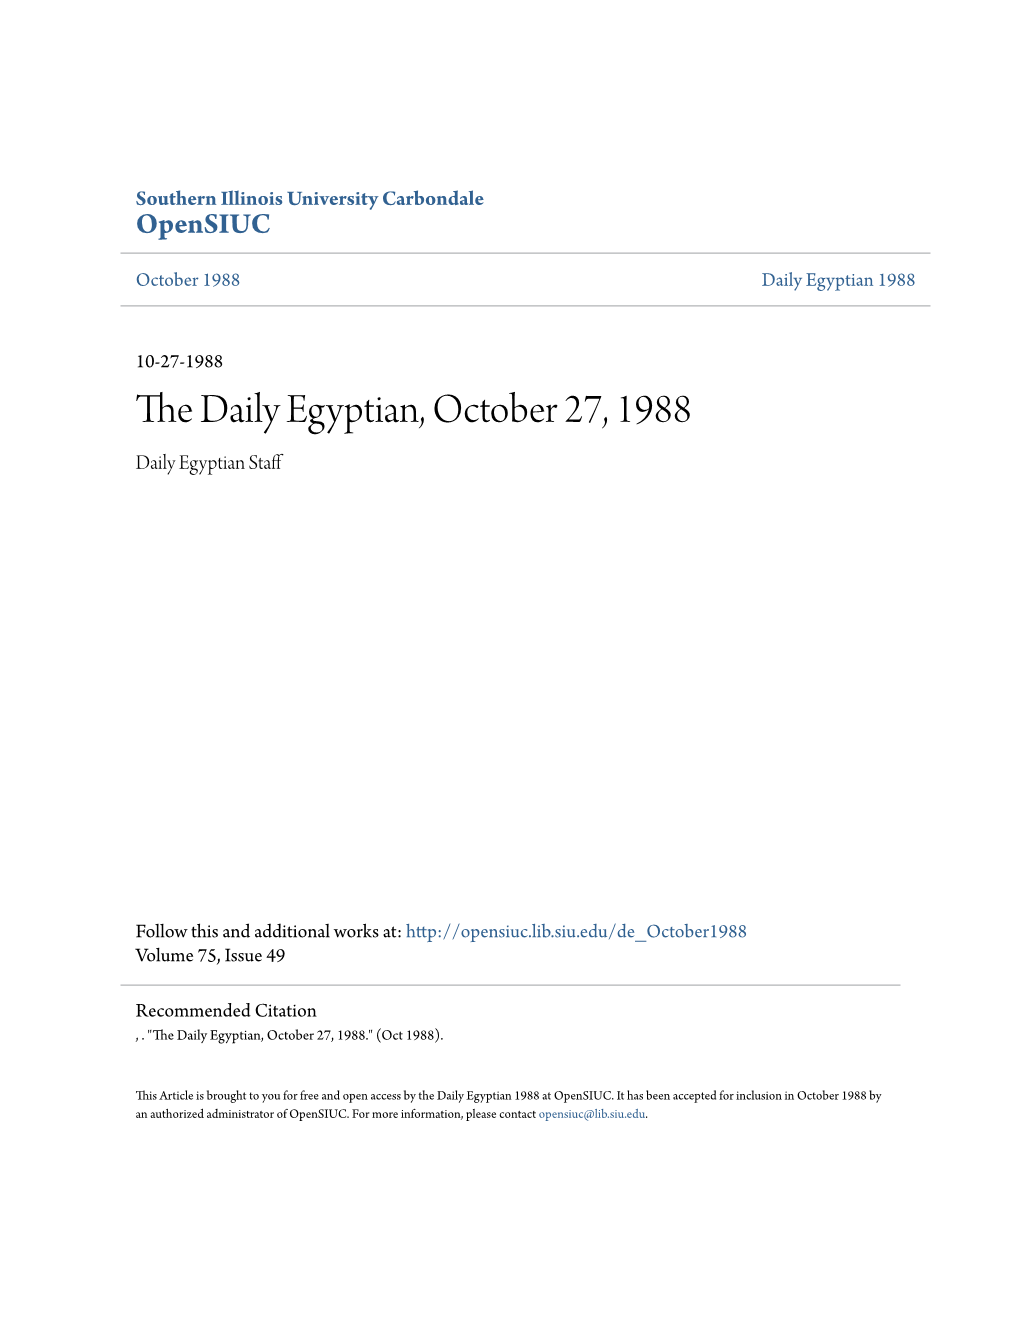 The Daily Egyptian, October 27, 1988